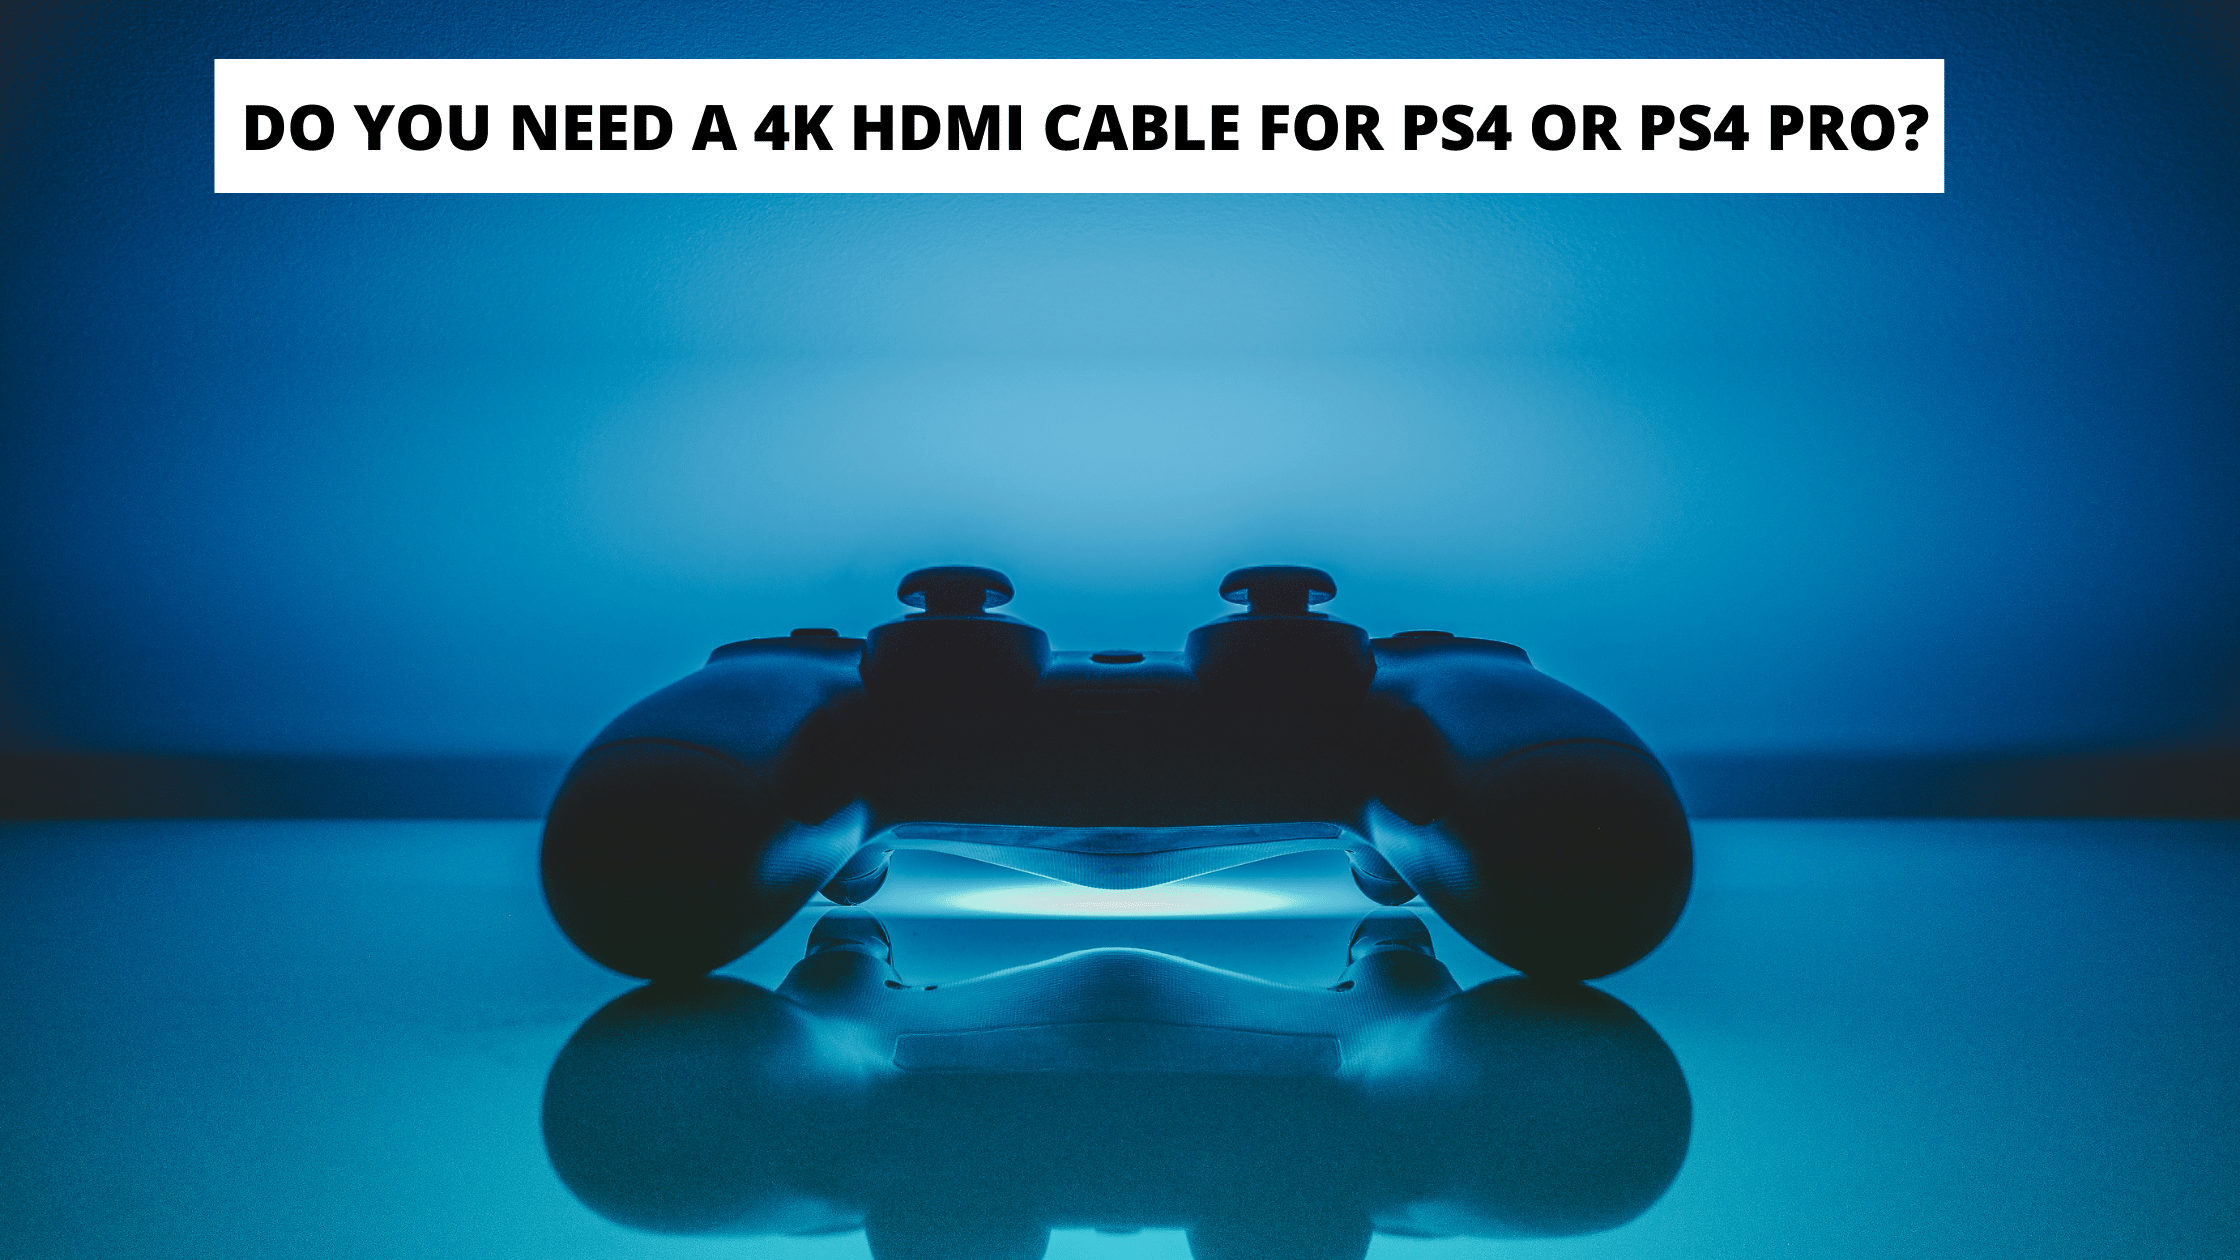 DO YOU NEED A 4K HDMI CABLE FOR PS4 OR PS4 PRO?